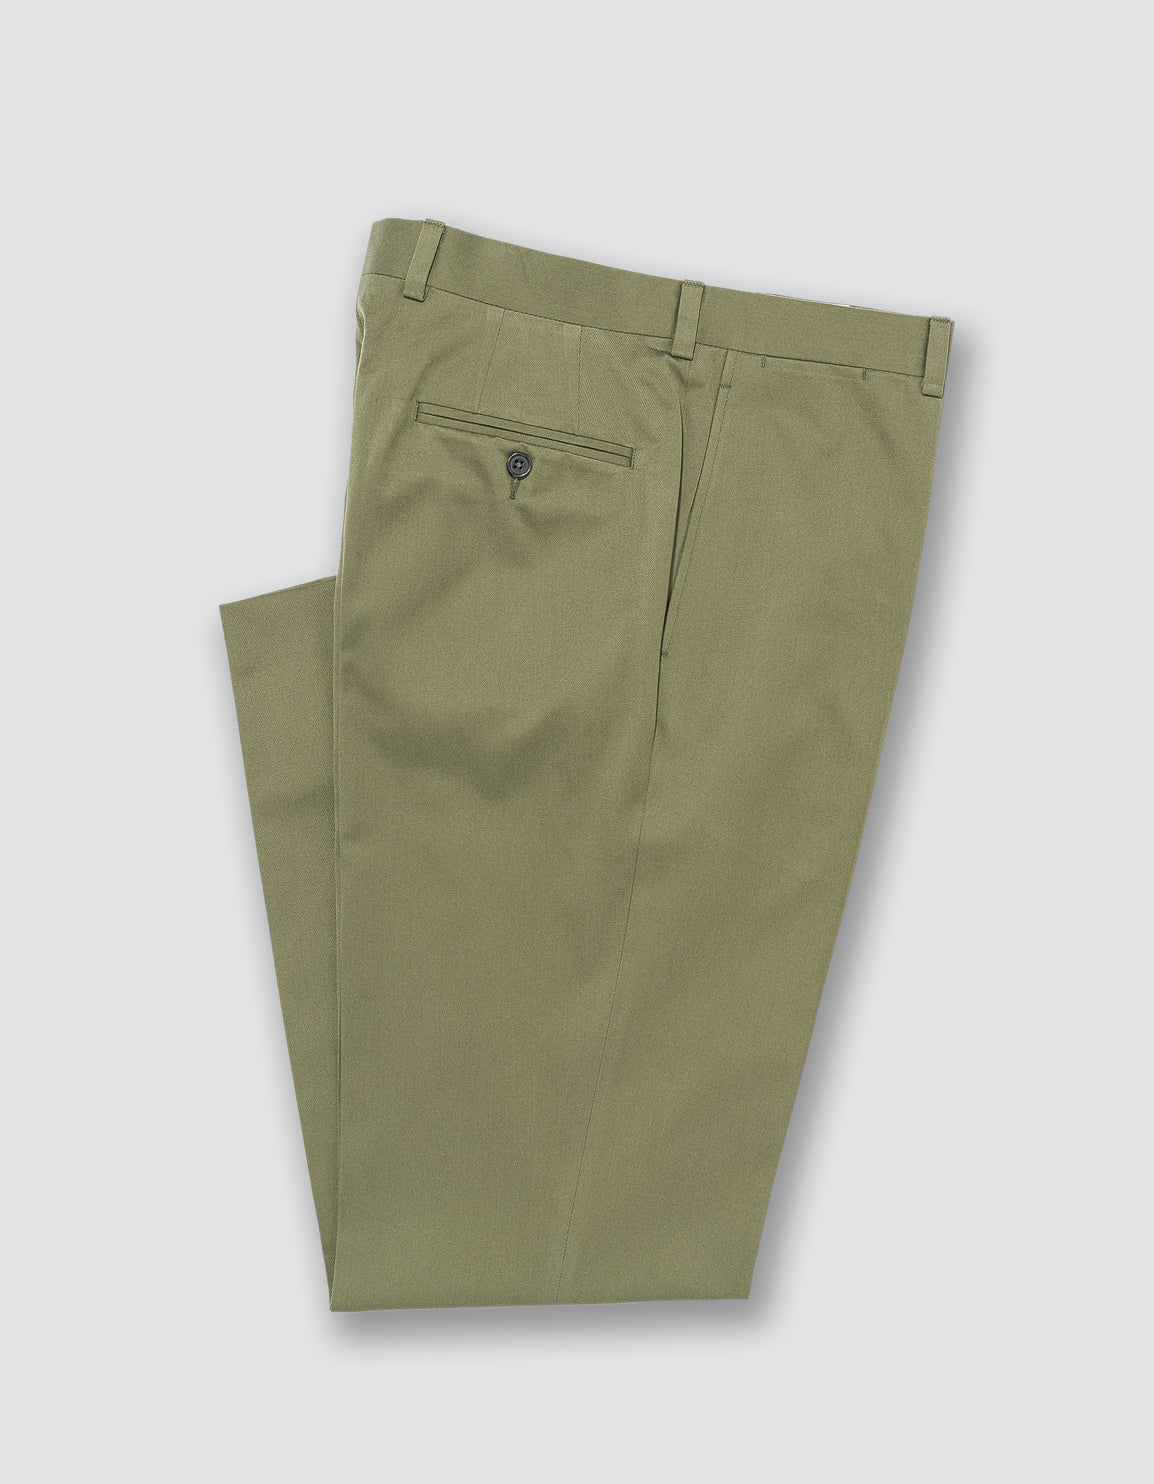 OLIVE COTTON DRILL CLOTH TROUSER - CLASSIC FIT